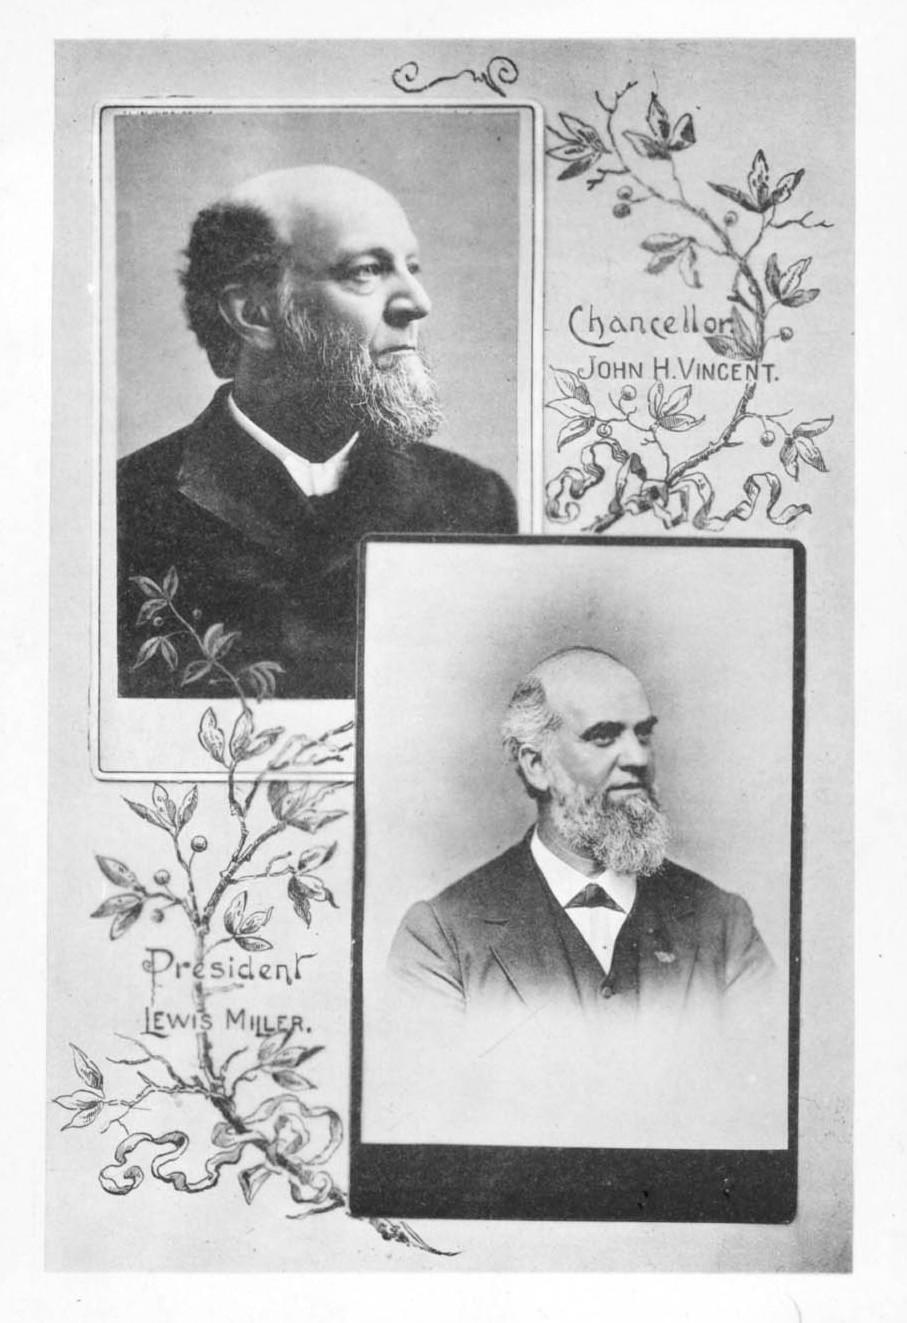 Page 17 Image of Vincent and Miller from a Chautauqua Institution publication.